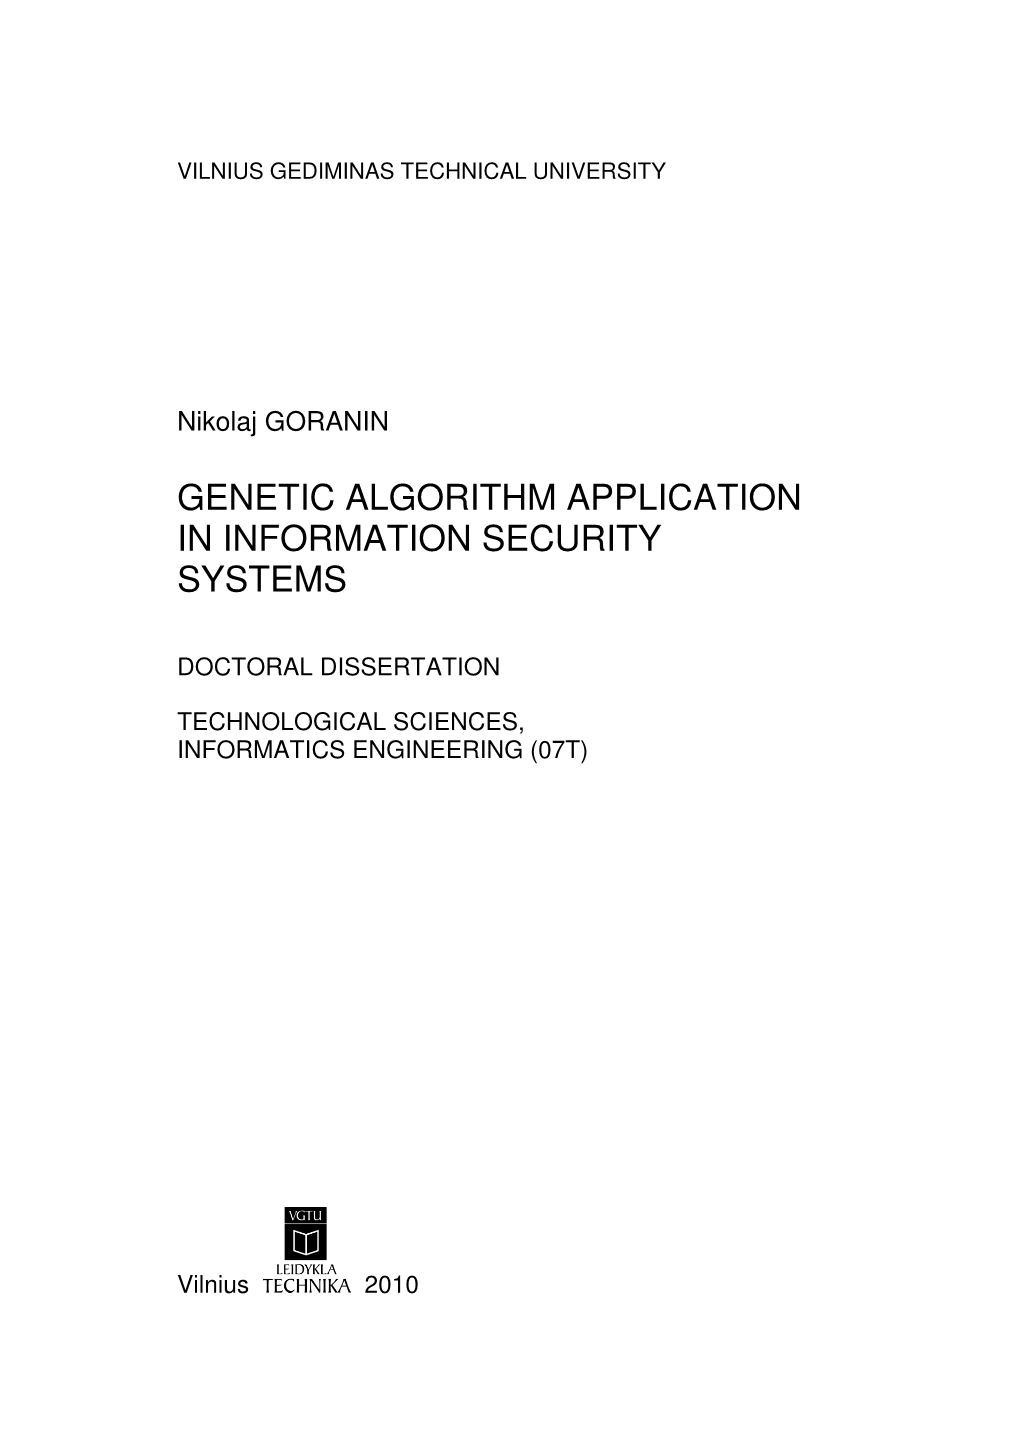 Genetic Algorithm Application in Information Security Systems